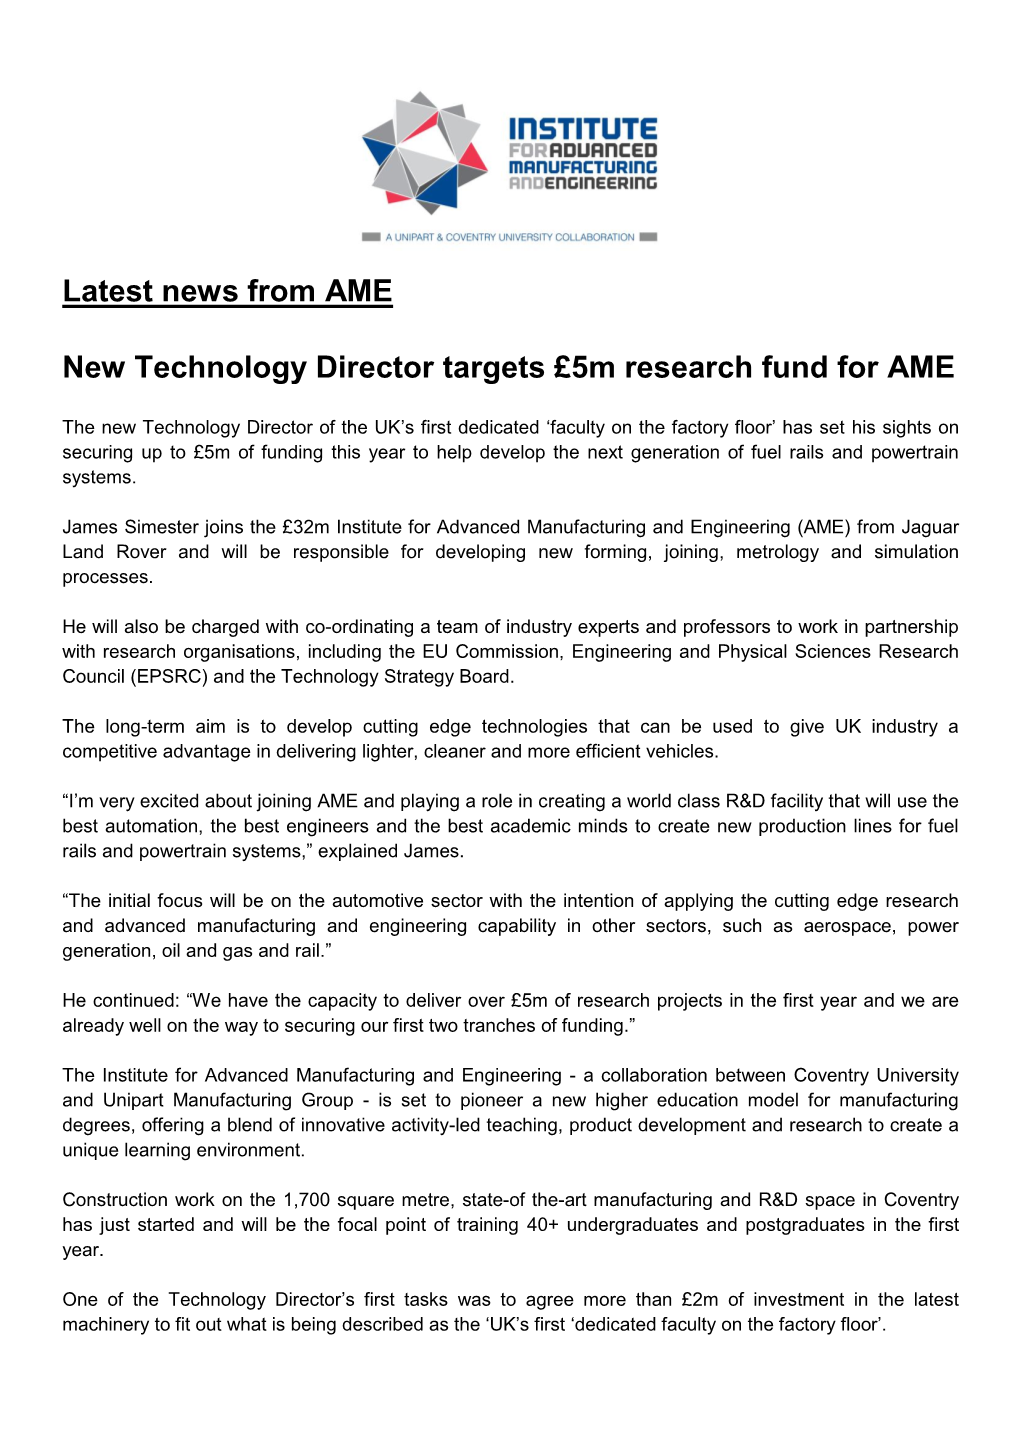 Latest News from AME New Technology Director Targets £5M